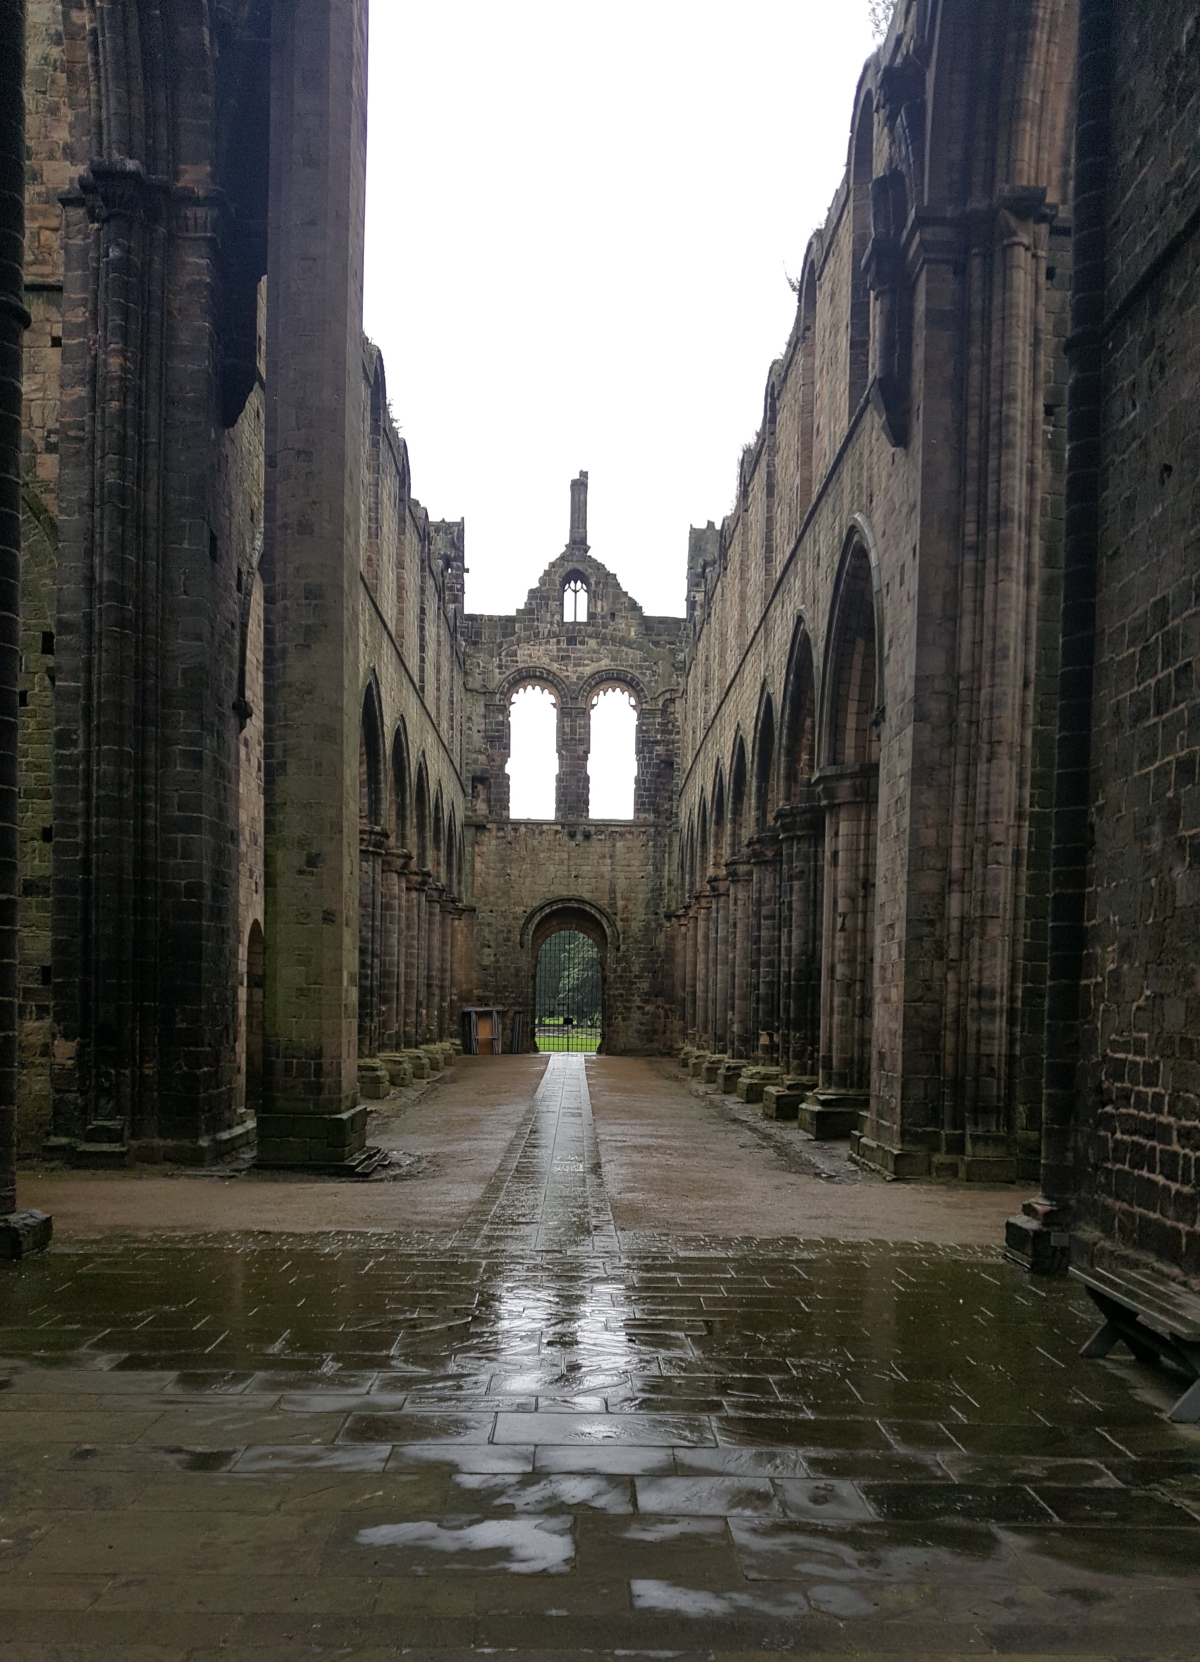 Alone in an Abbey: A Rainy Day in Kirkstall